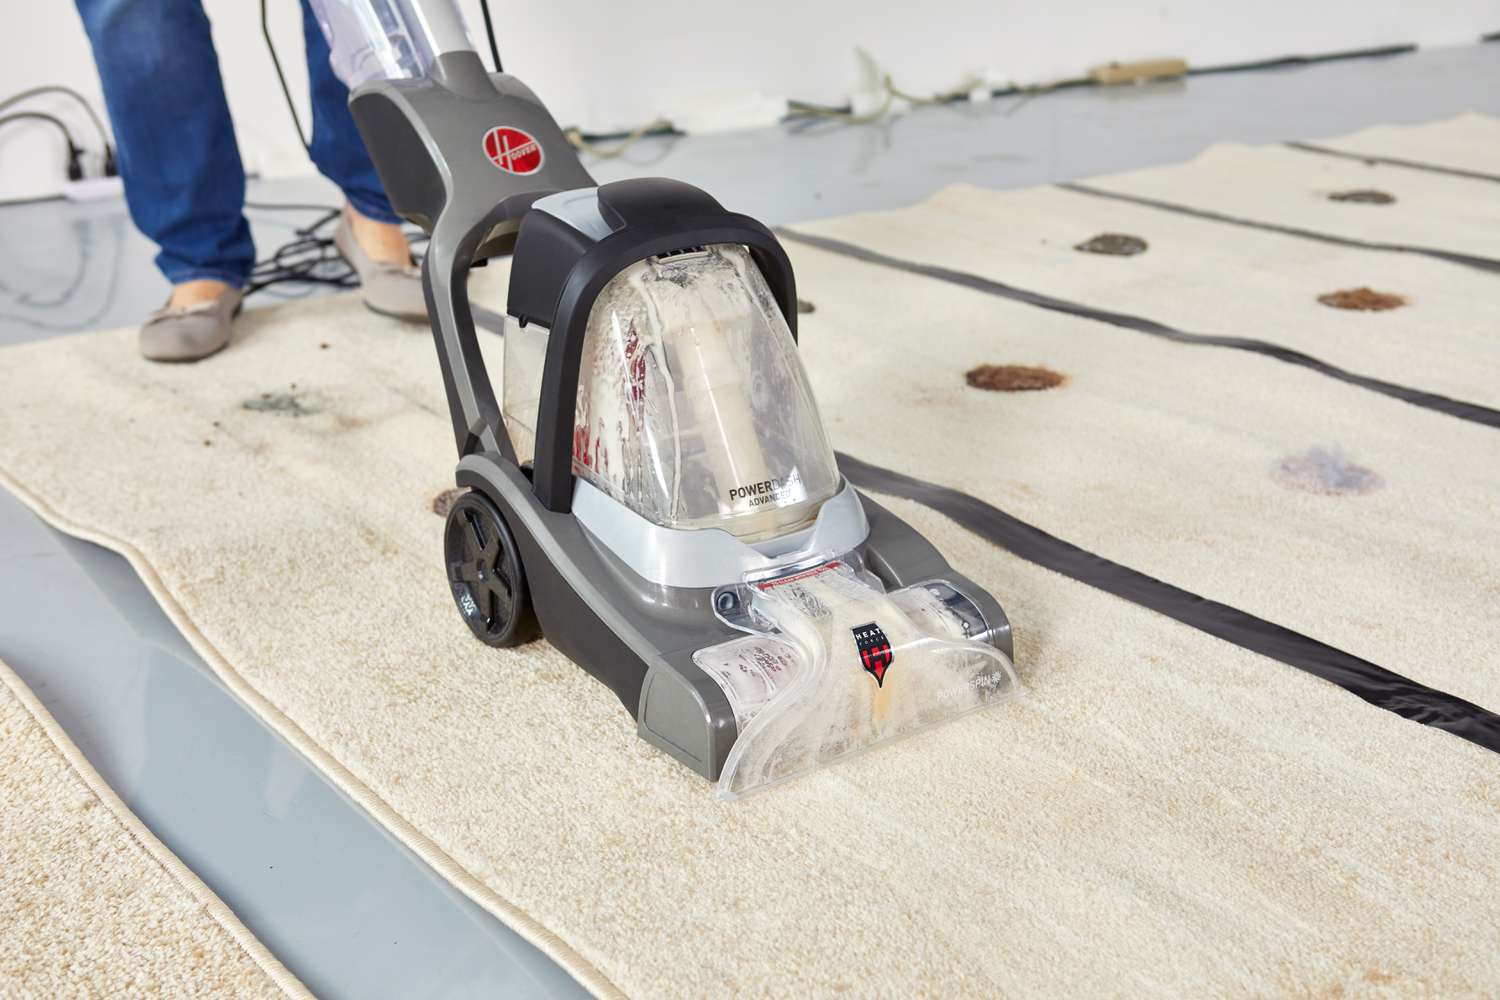 Which Is Better: Hoover Or Bissell Carpet Shampooer